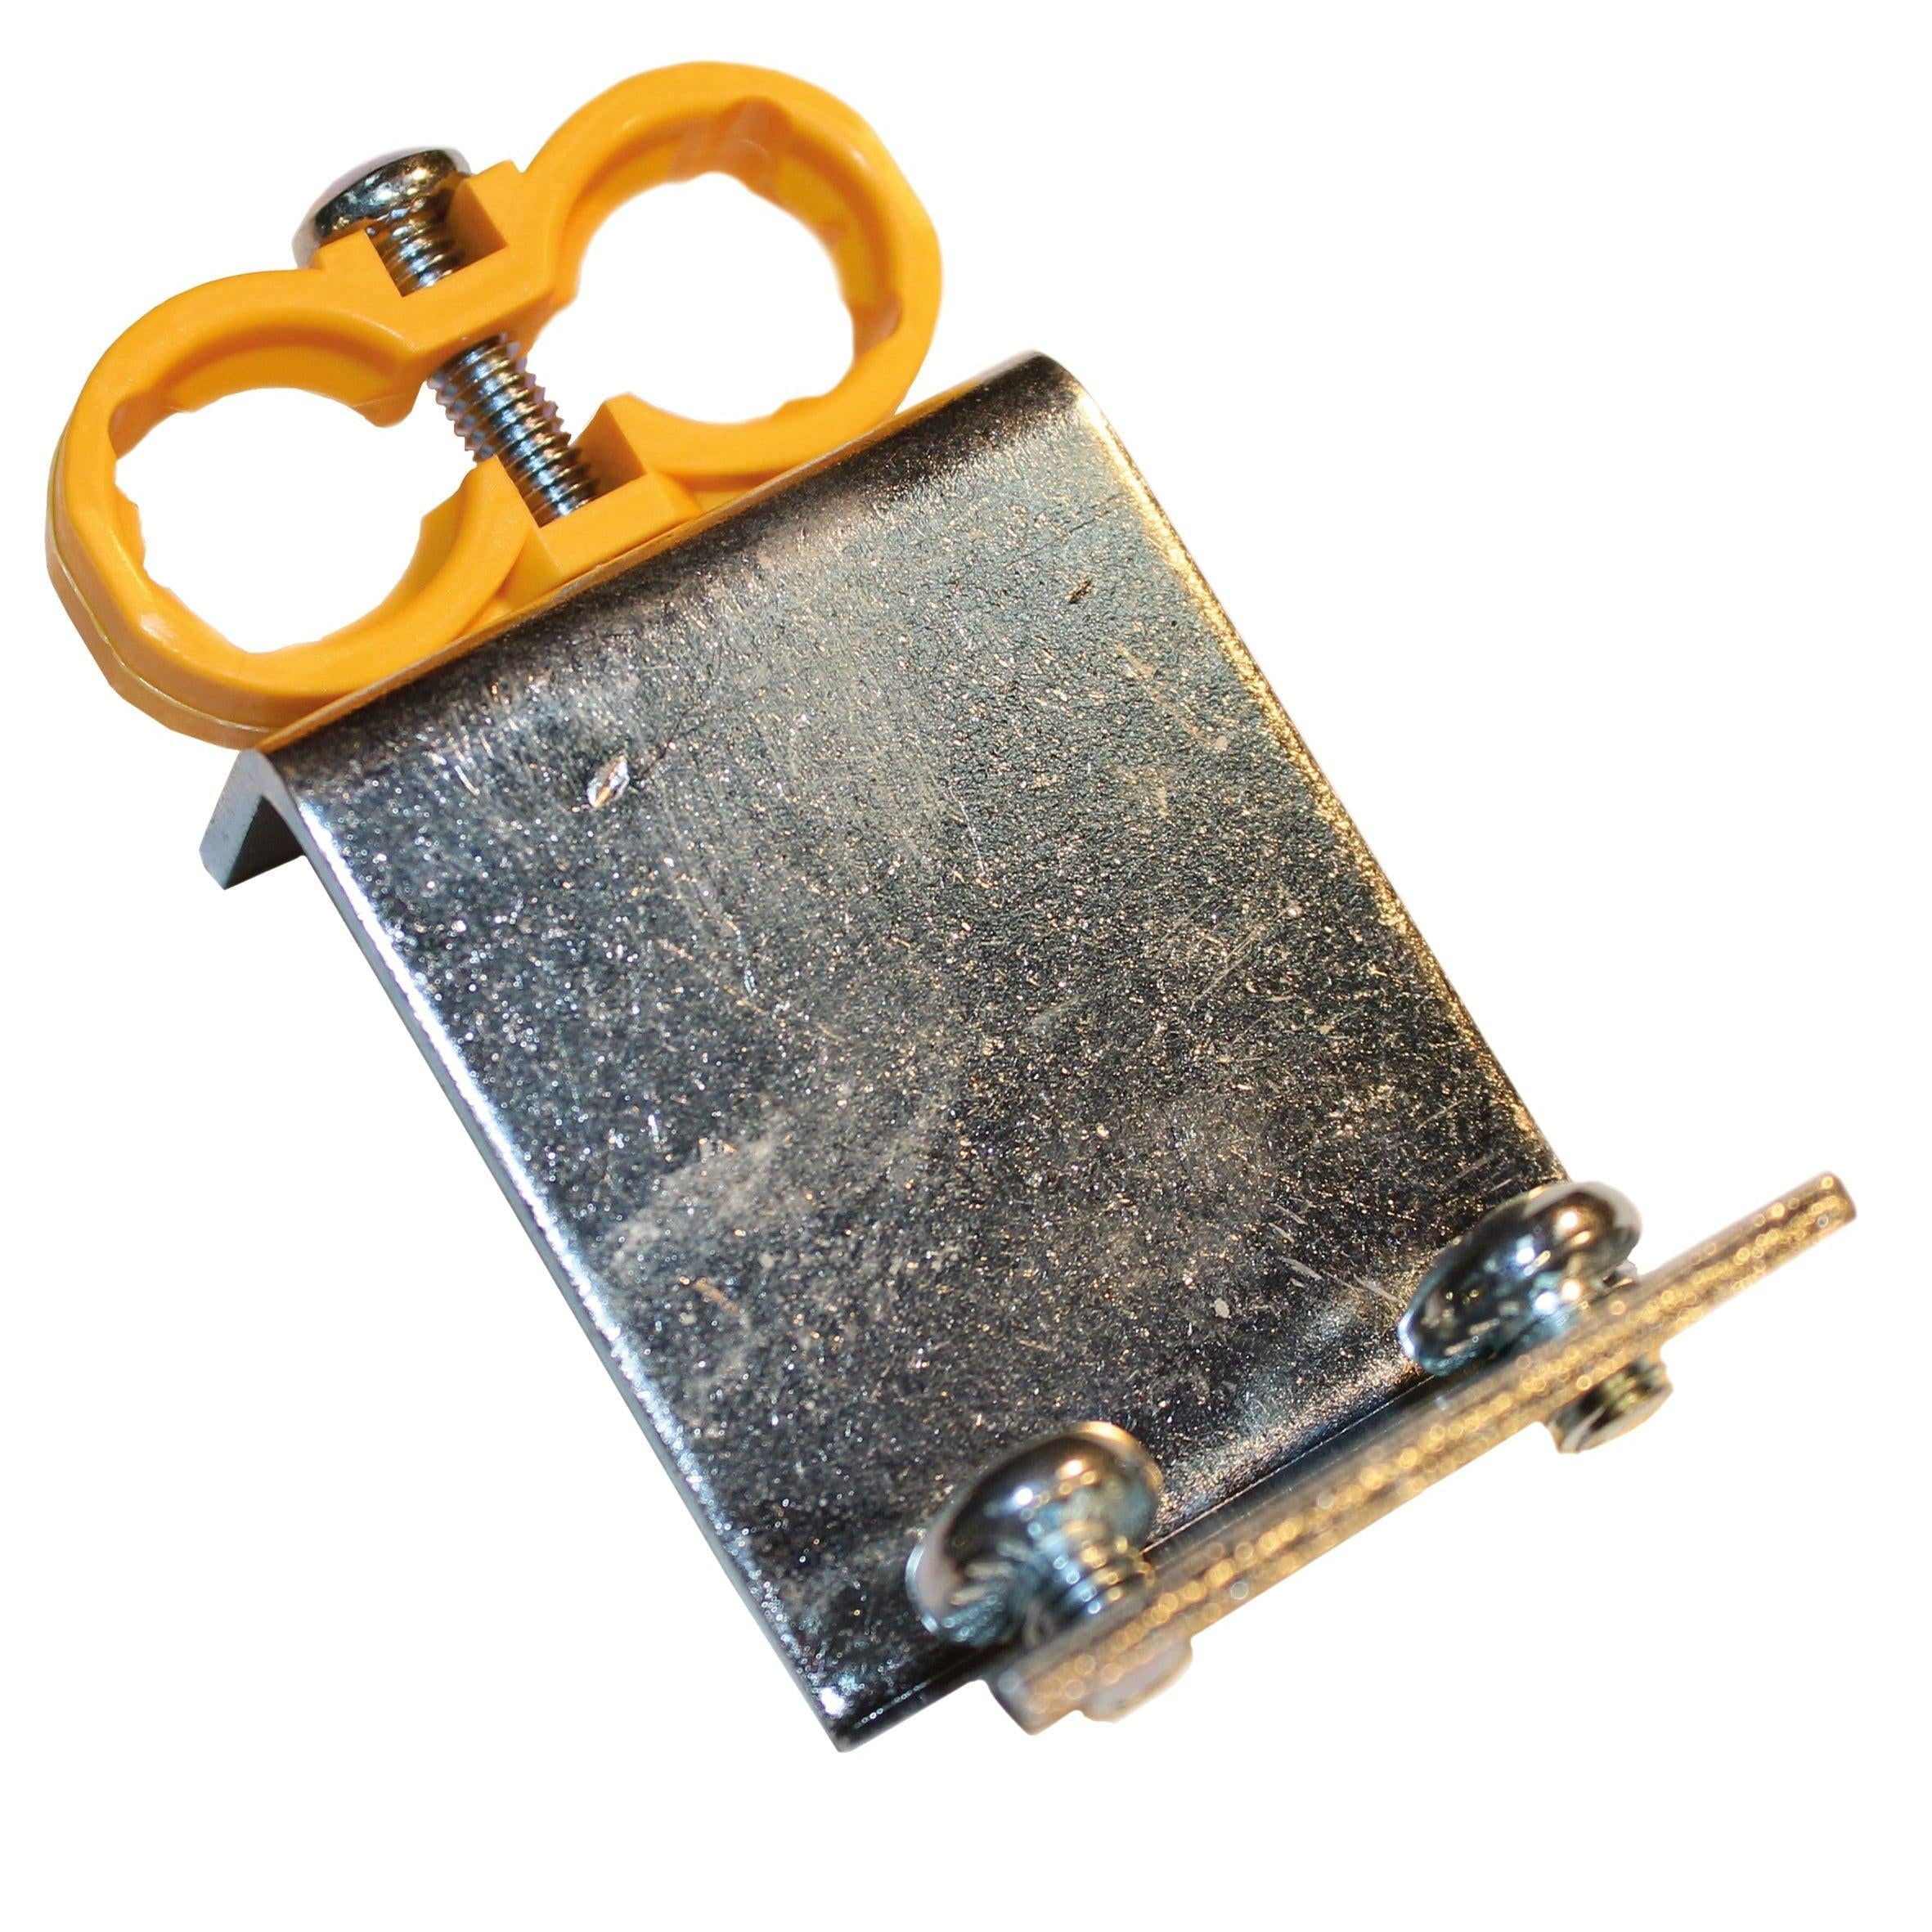 FuseBox ACCF Tail Clamp